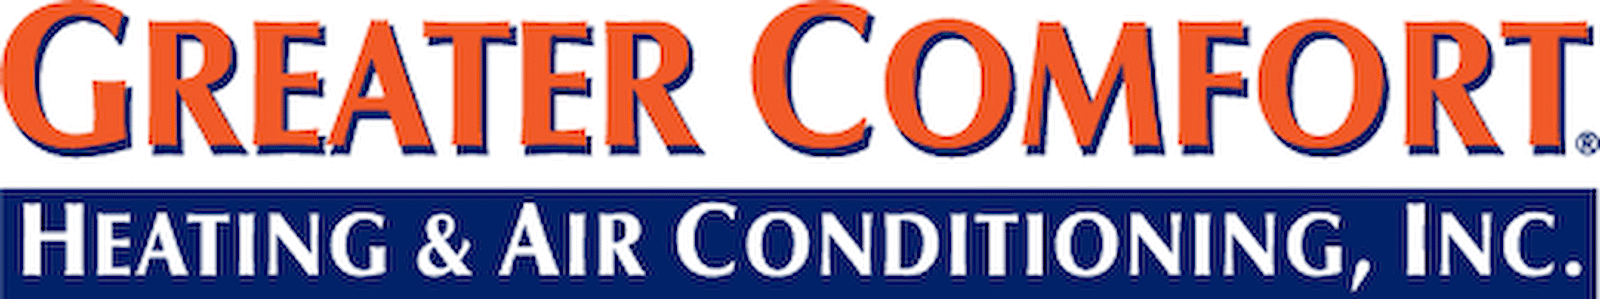 Greater Comfort Heating & Air Conditioning